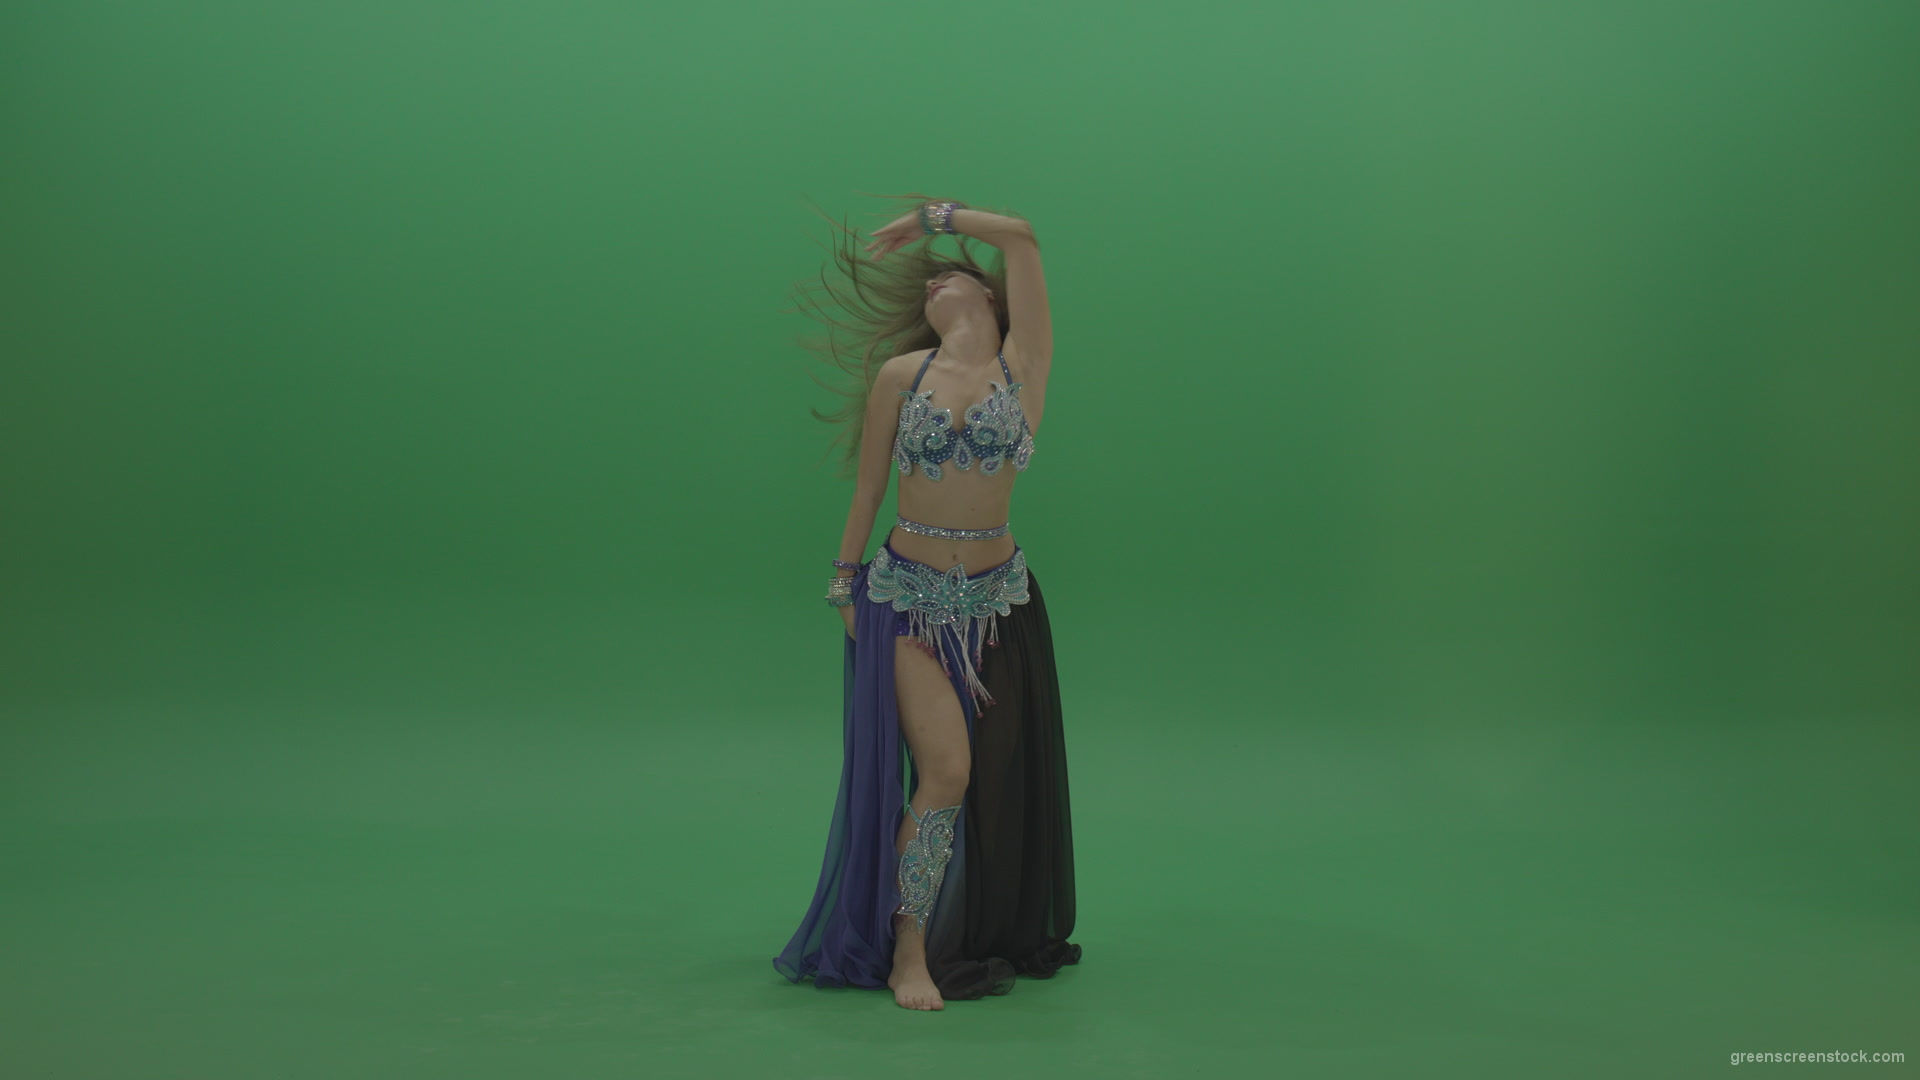 Foxy-belly-dancer-in-purple-and-black-wear-display-amazing-dance-moves-over-chromakey-background_008 Green Screen Stock